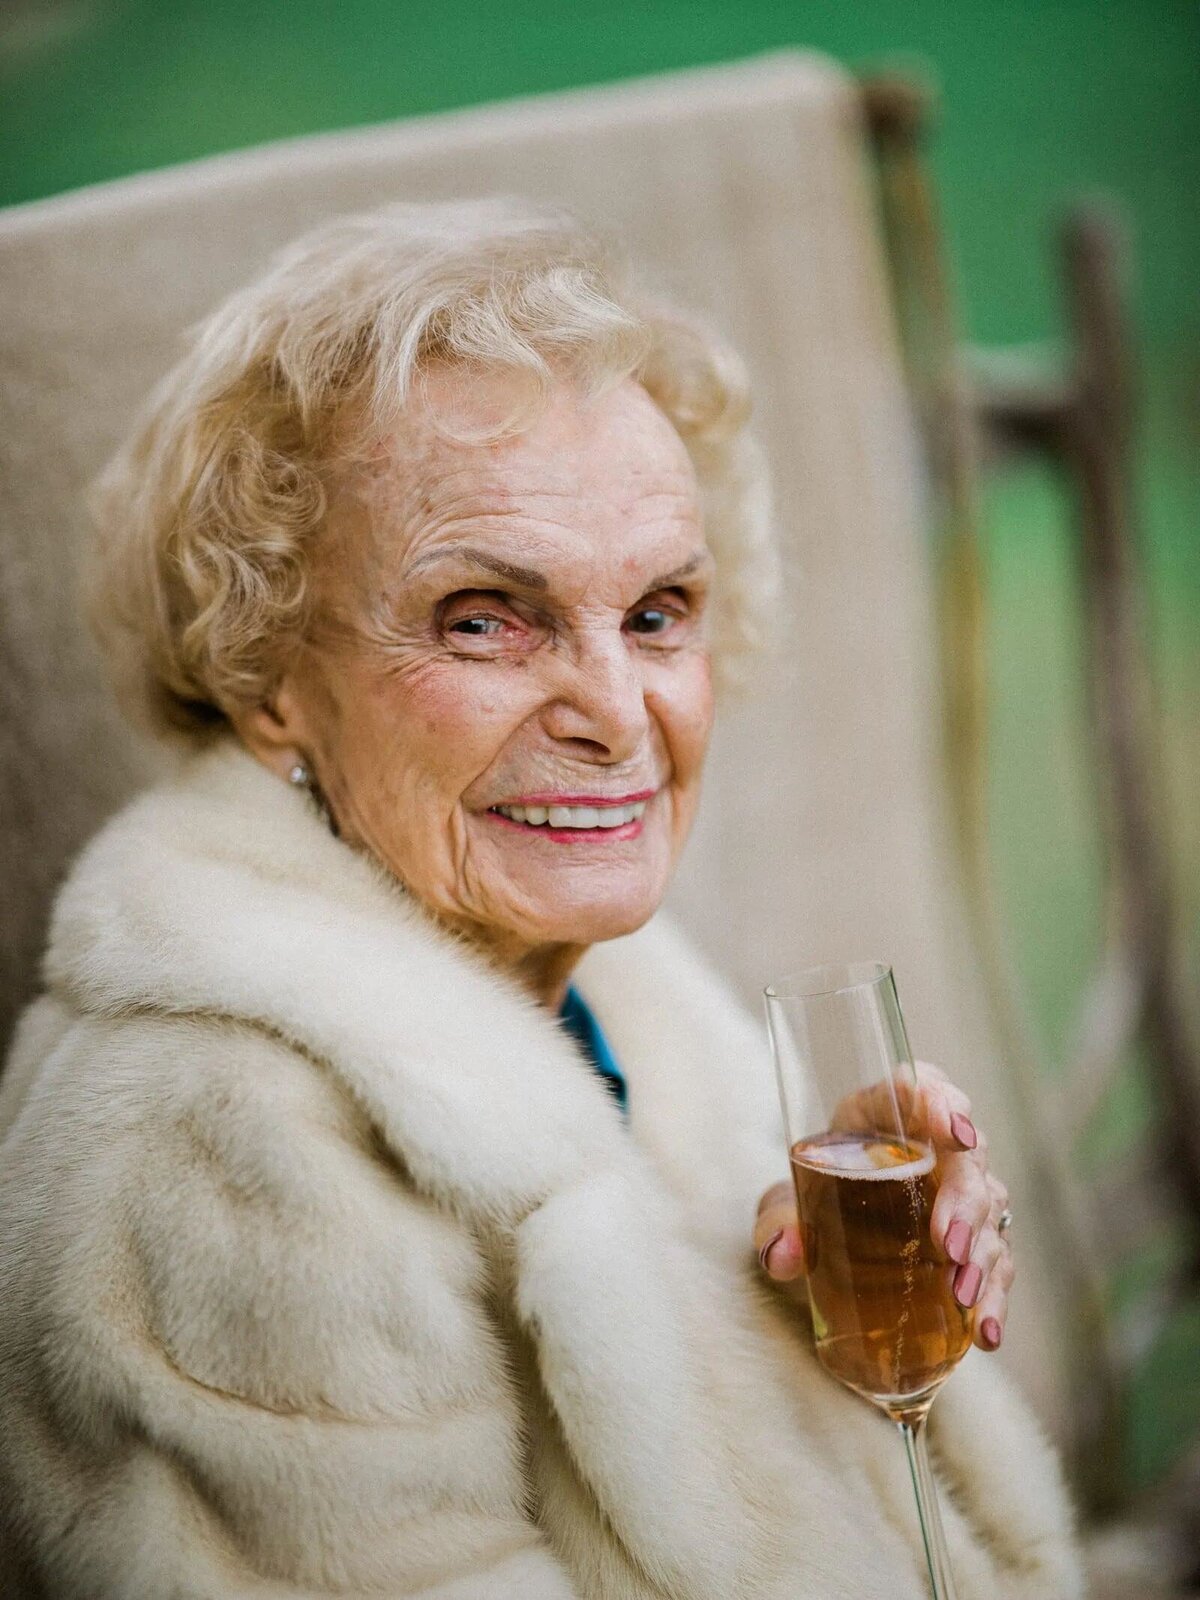 An older woman smiling and holding a drink.